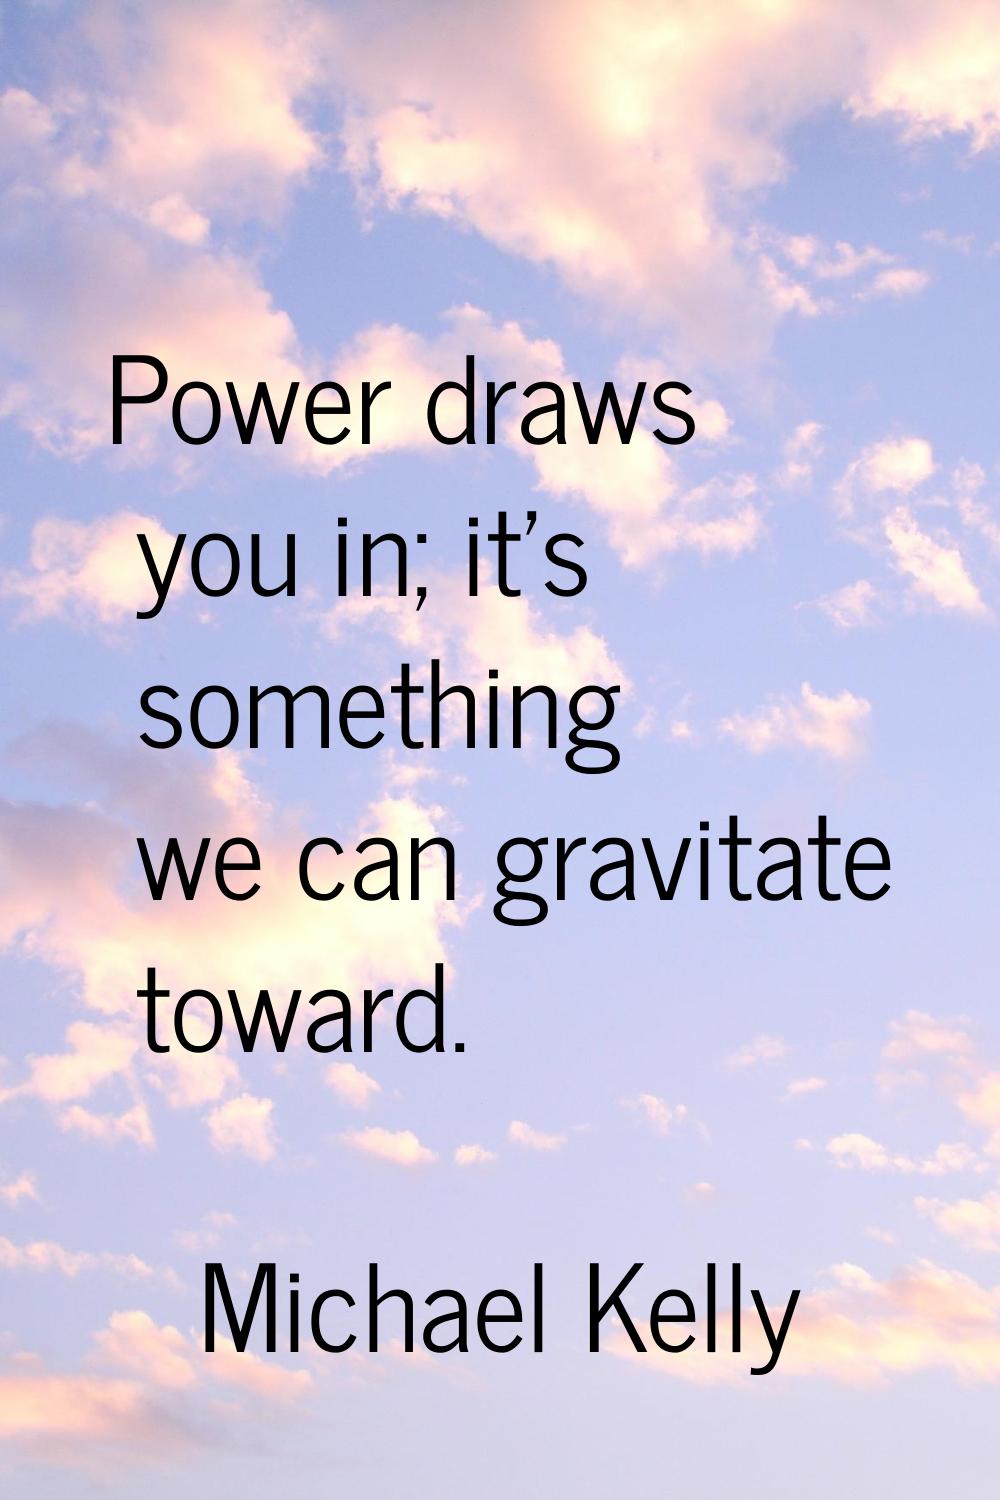 Power draws you in; it's something we can gravitate toward.